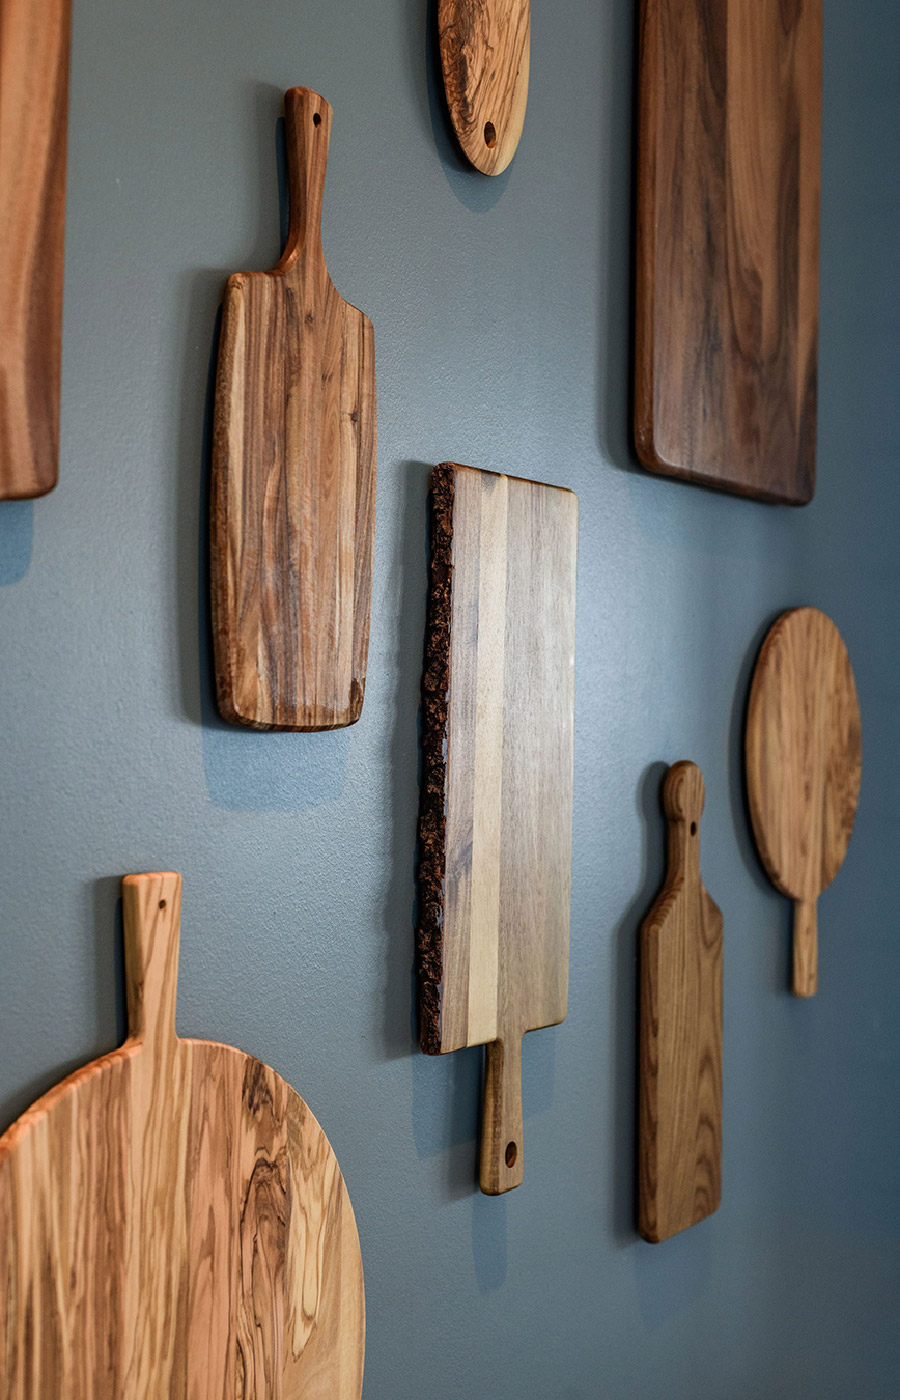 Cutting boards hanging on a wall.